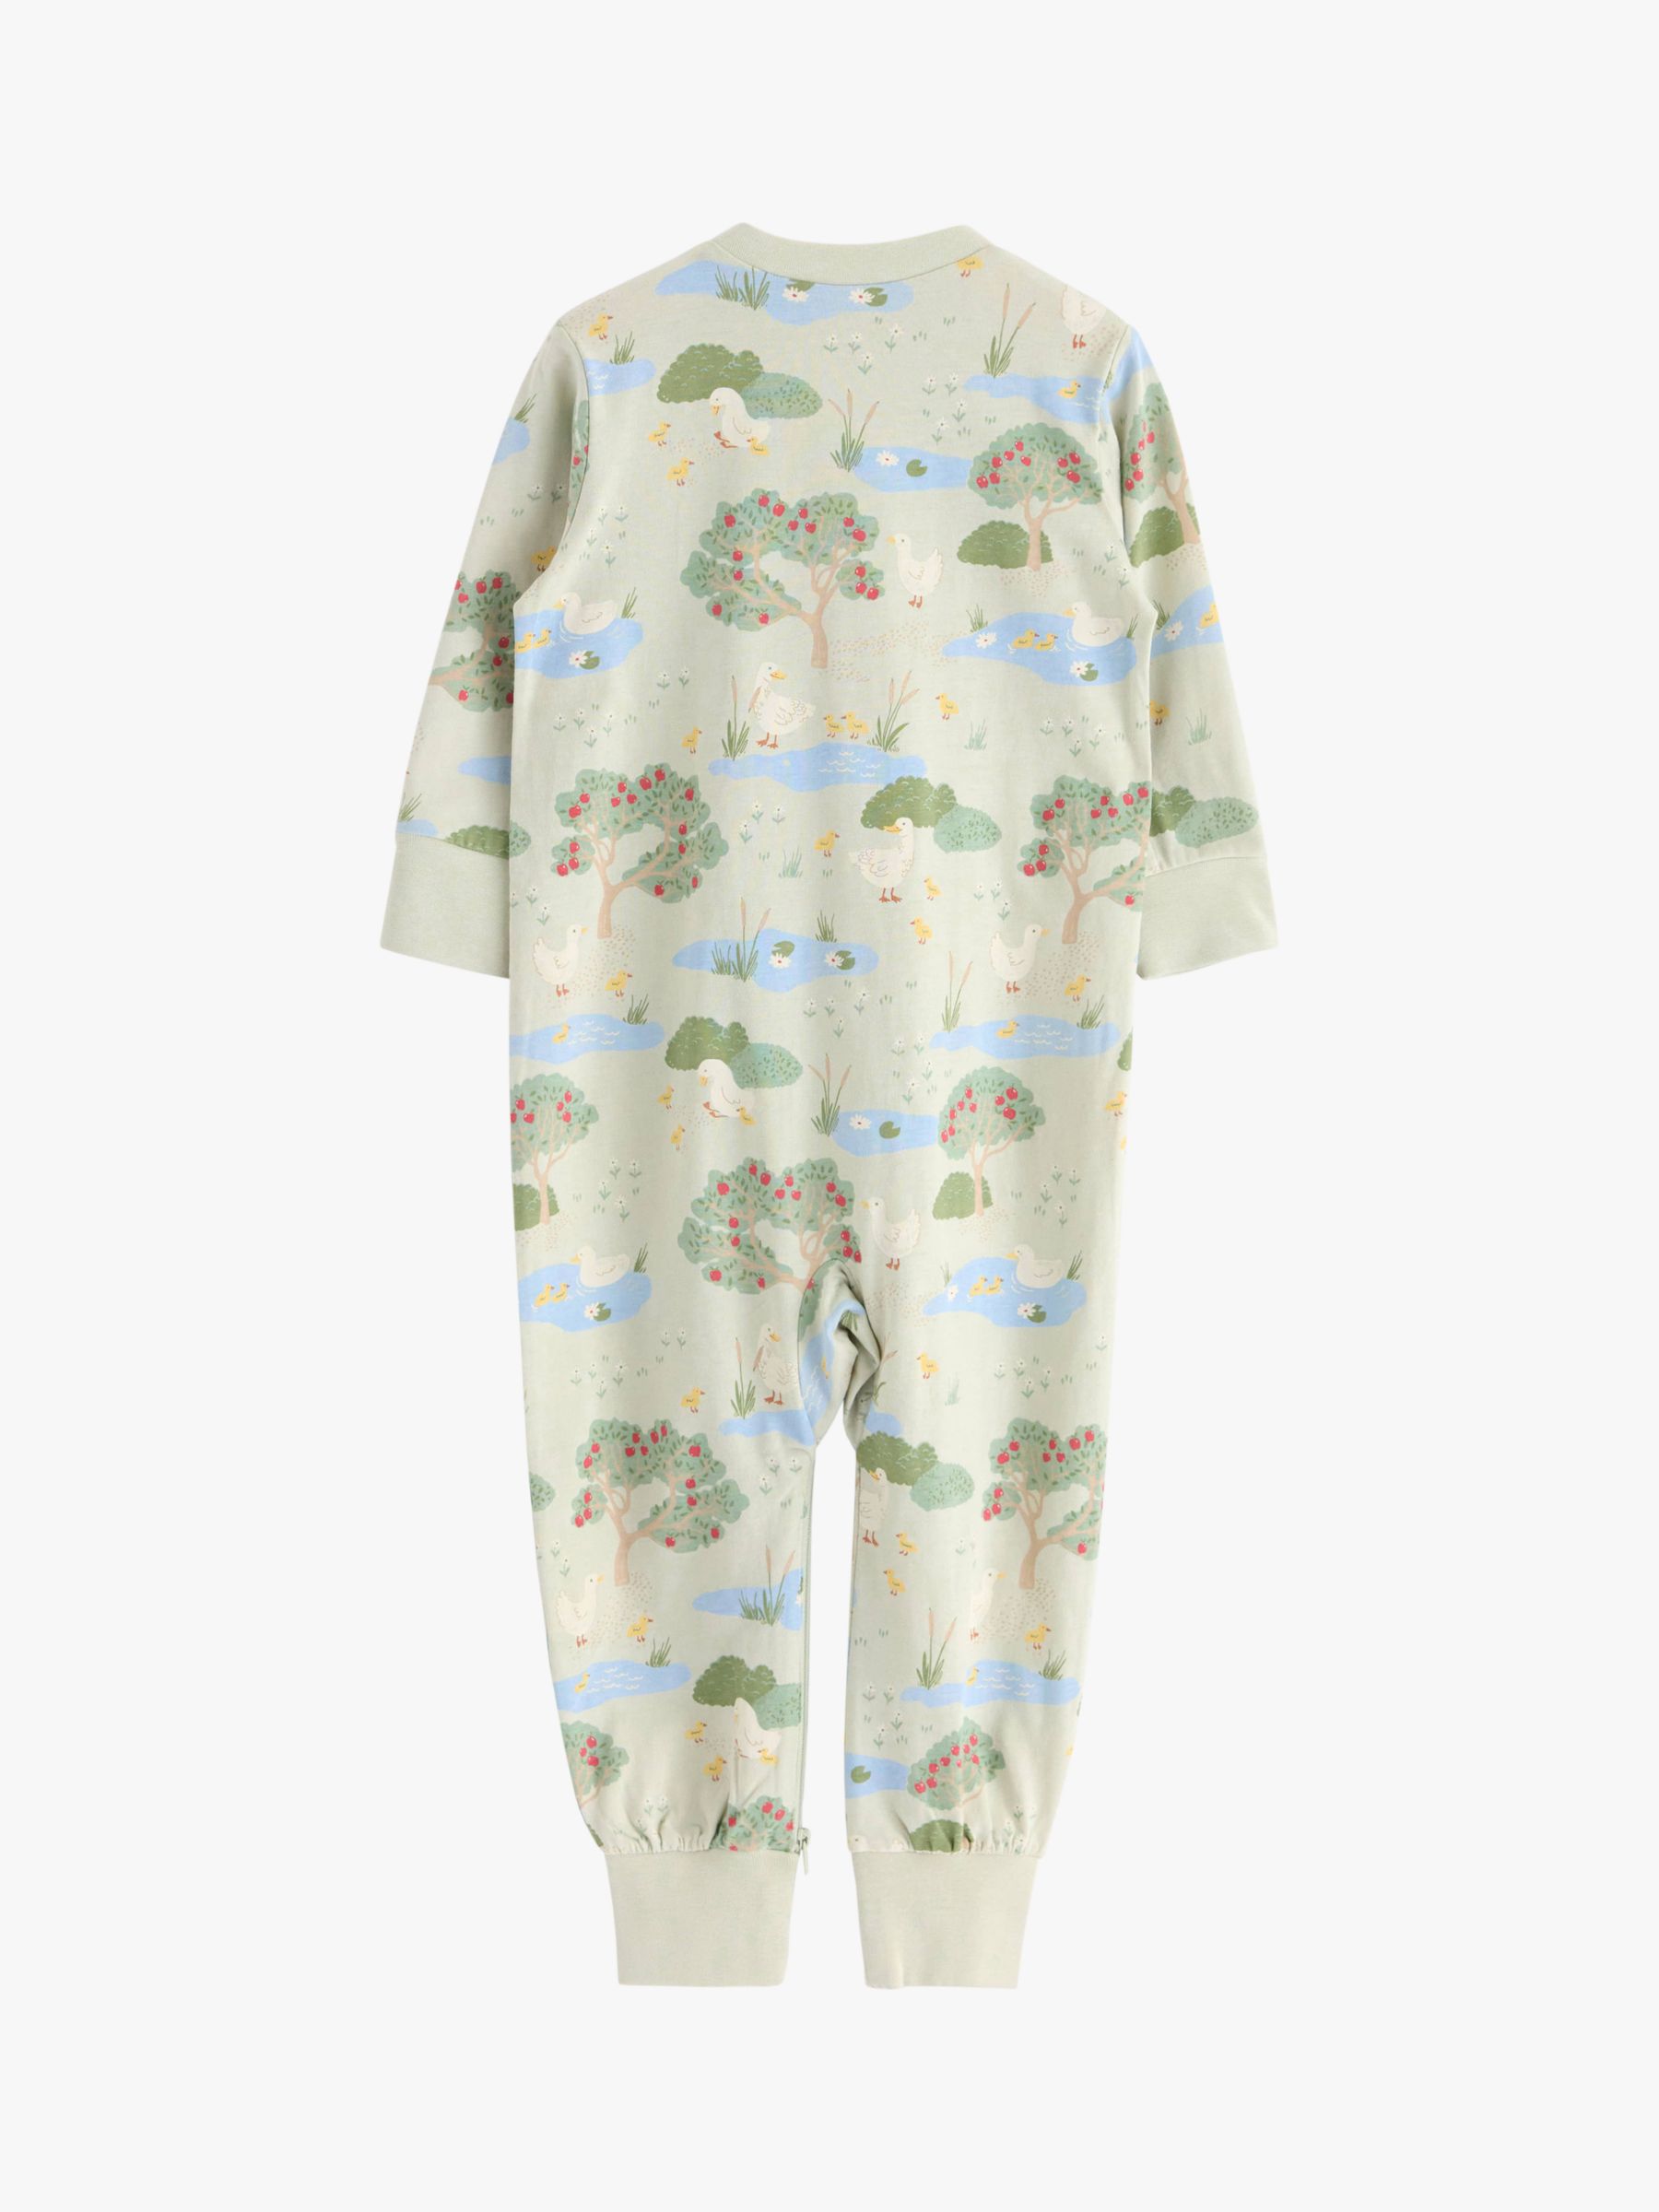 Lindex Baby Organic Cotton Landscape Print All-in-One Pyjamas, Light Green, 10-12 months